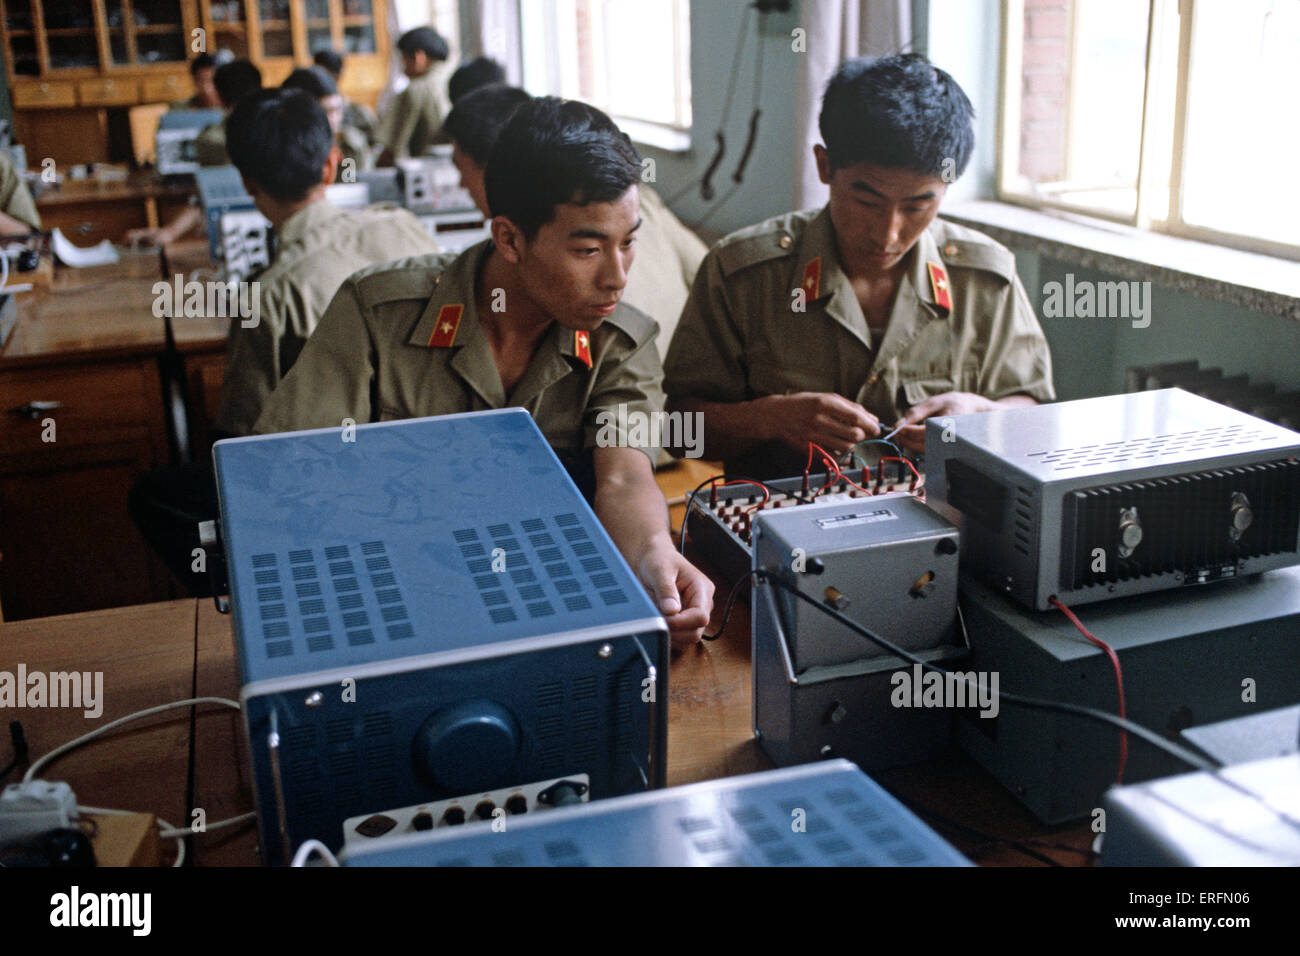 Electrical engineering training for Peoples Liberation Army officers at Shijiazhuang Military Academy, Hubei province, China Stock Photo